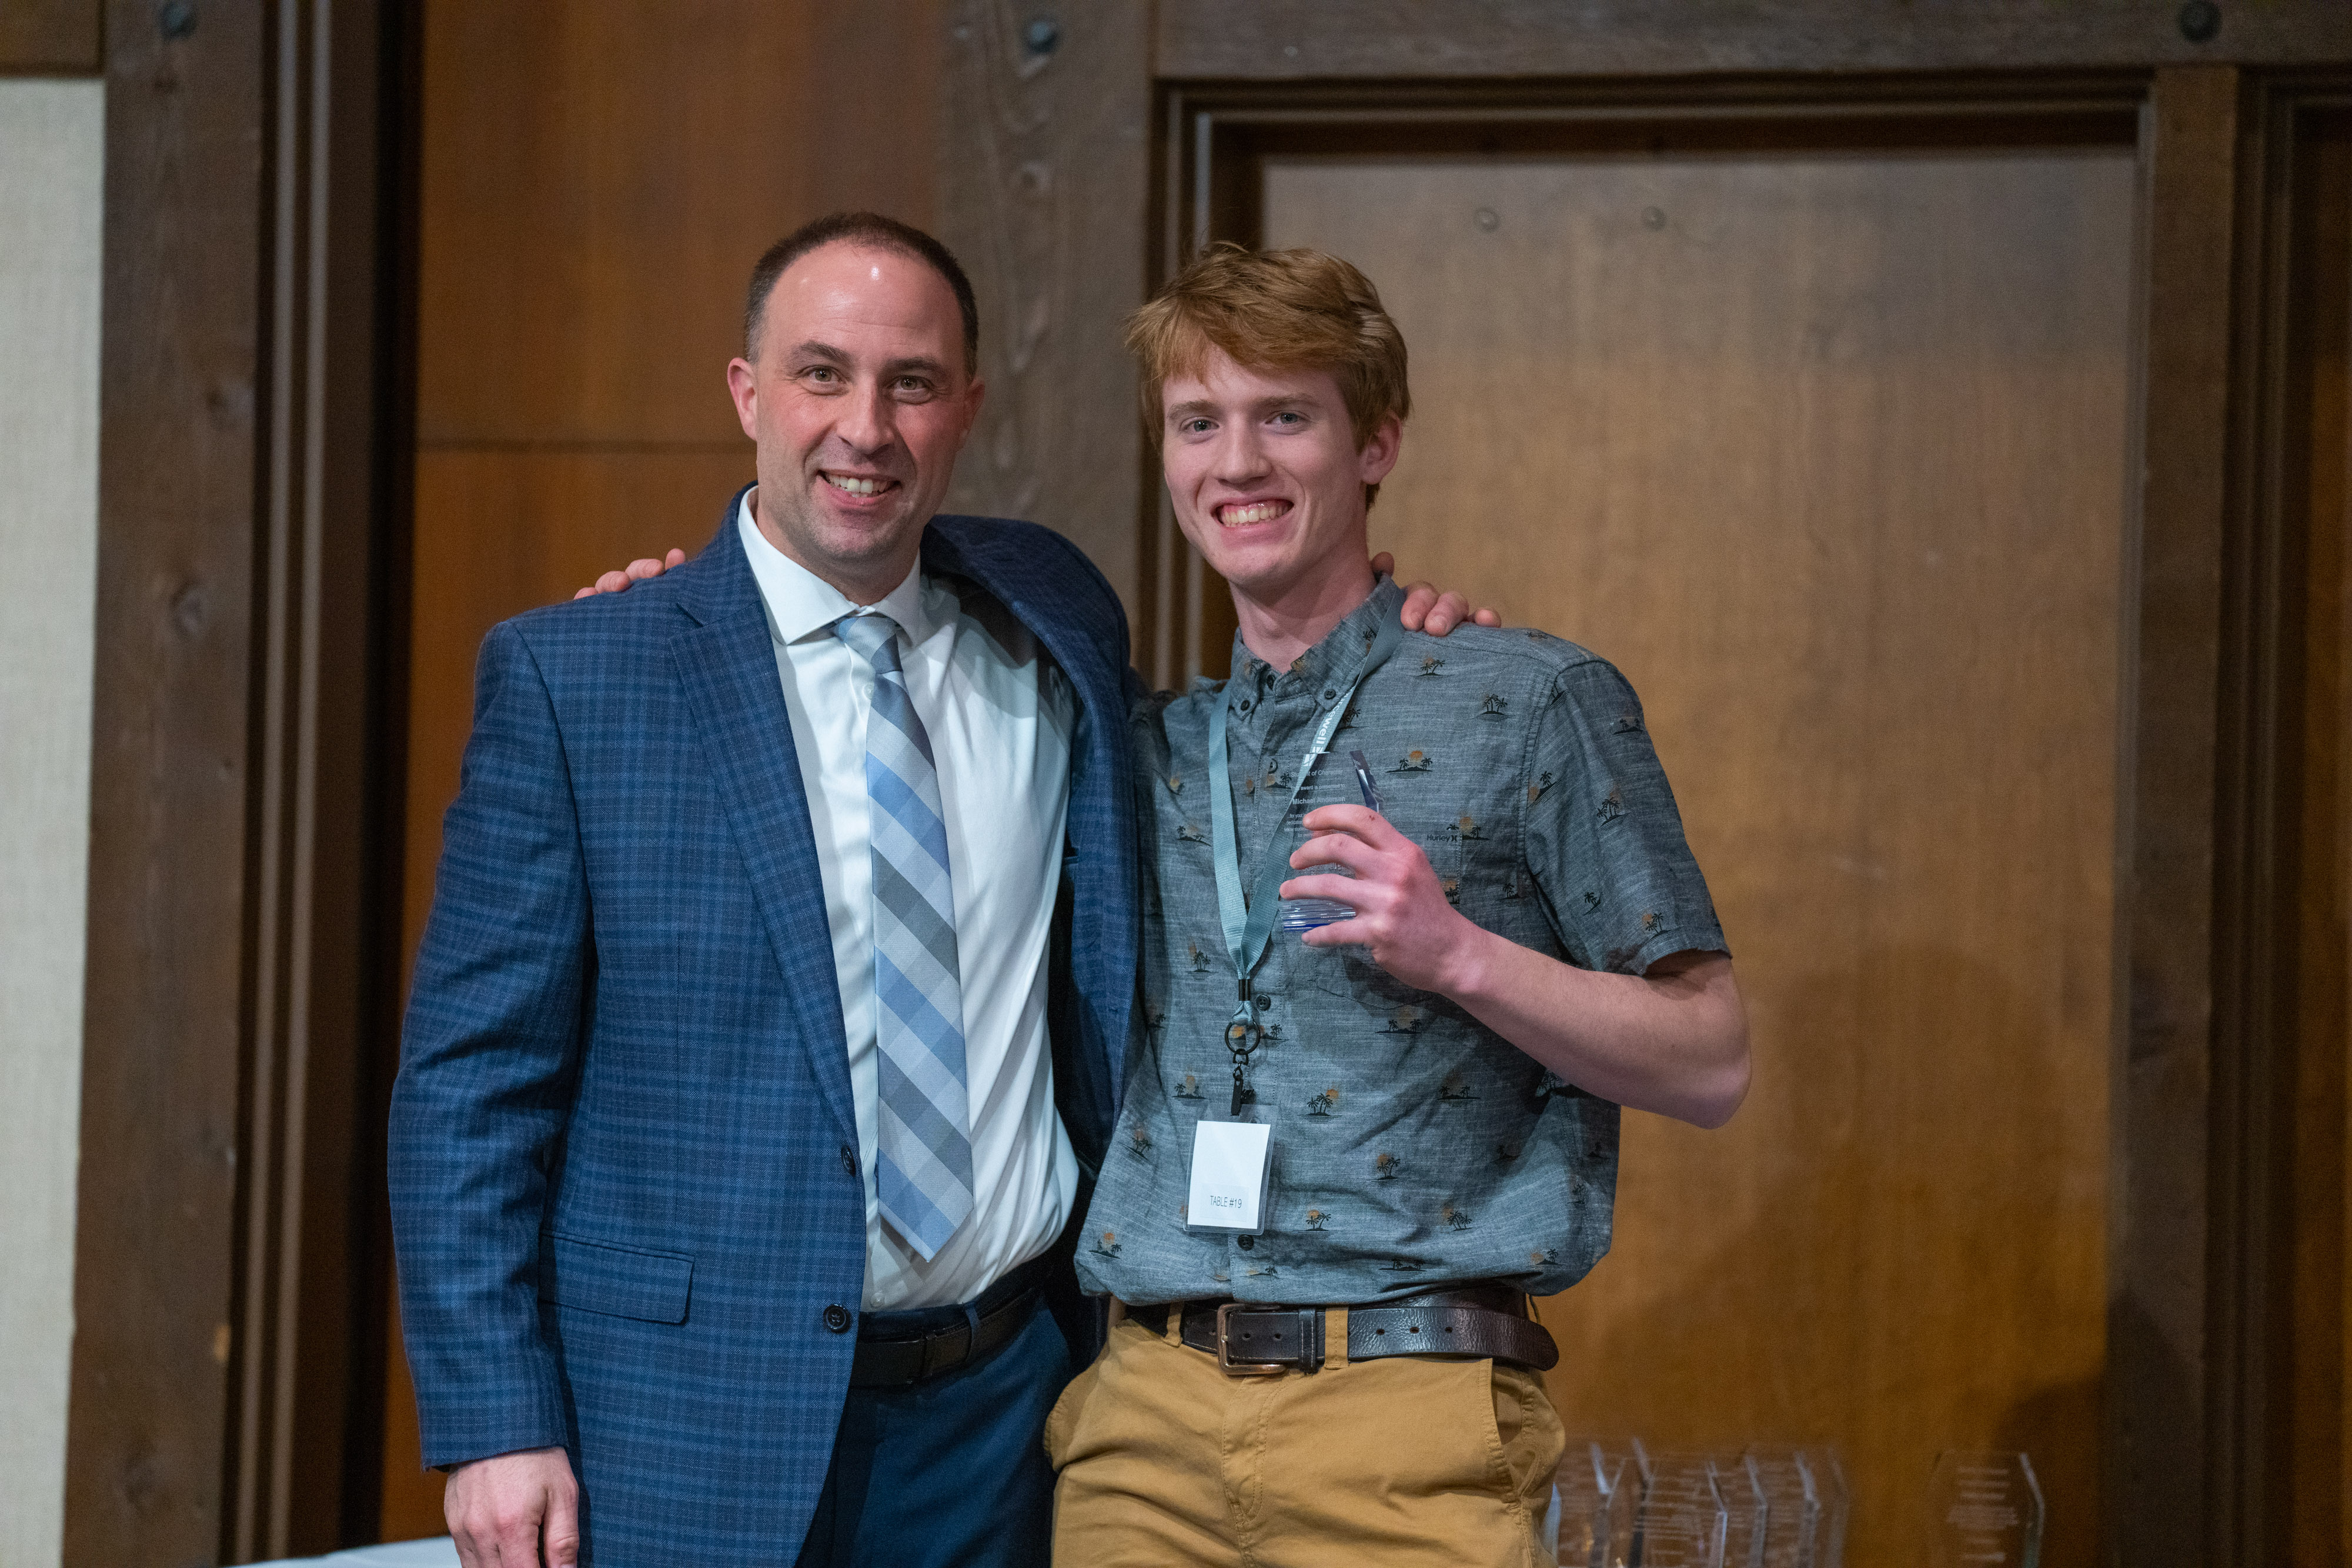 2023 Student of Character award recipient with Sourcewell CEO